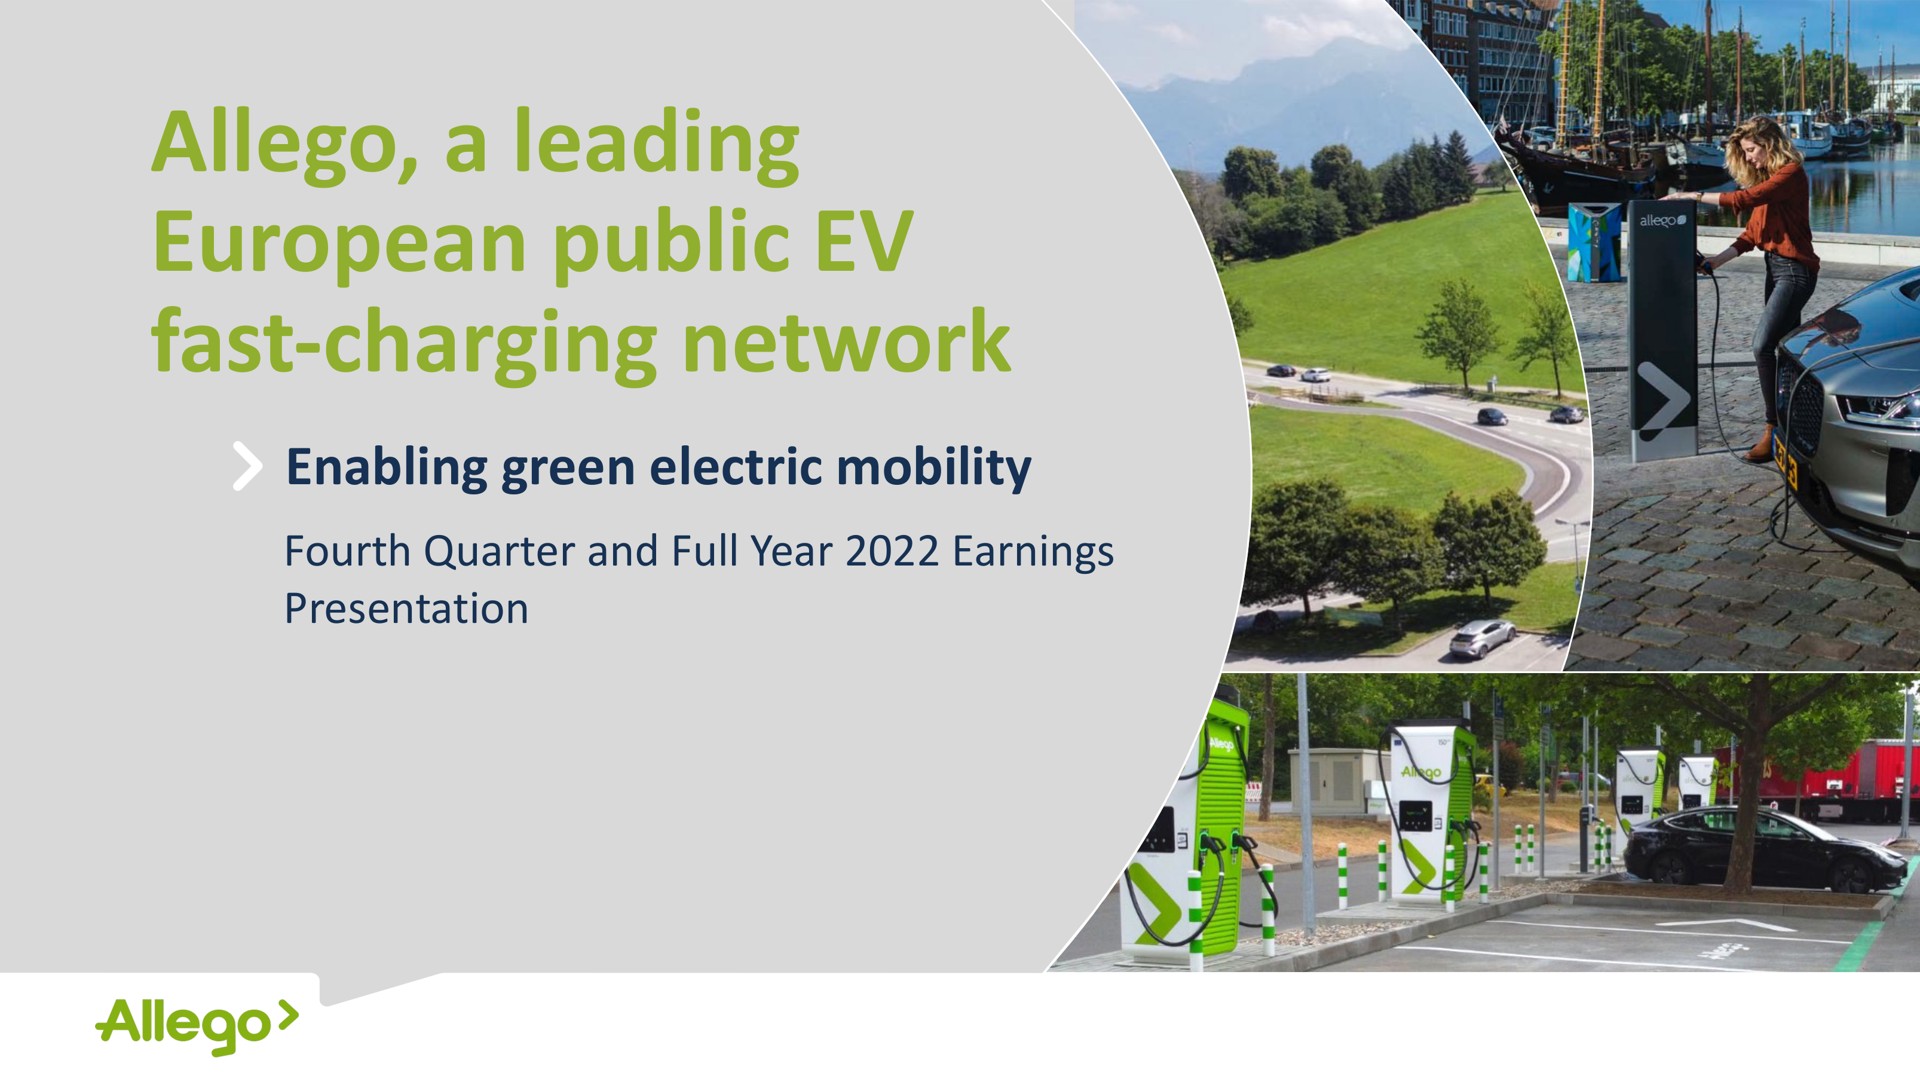 a leading public fast charging network enabling green electric mobility fourth quarter and full year earnings presentation | Allego